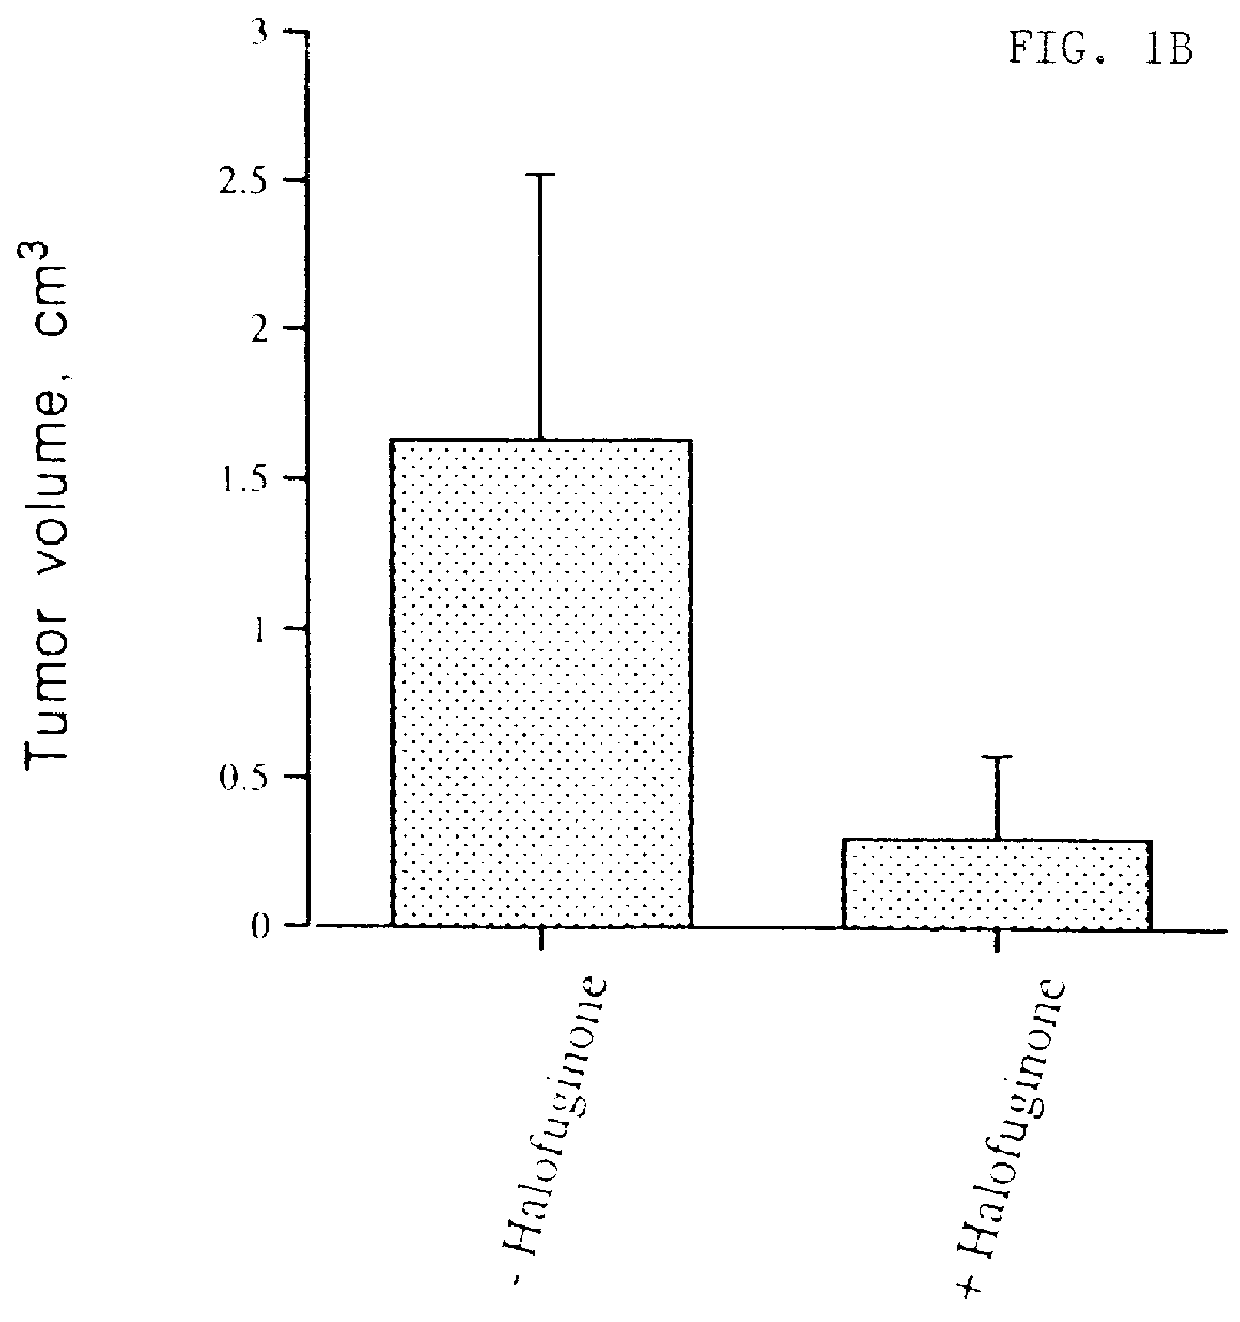 Quinazolinone containing pharmaceutical compositions for prevention of neovascularization and for treating malignancies